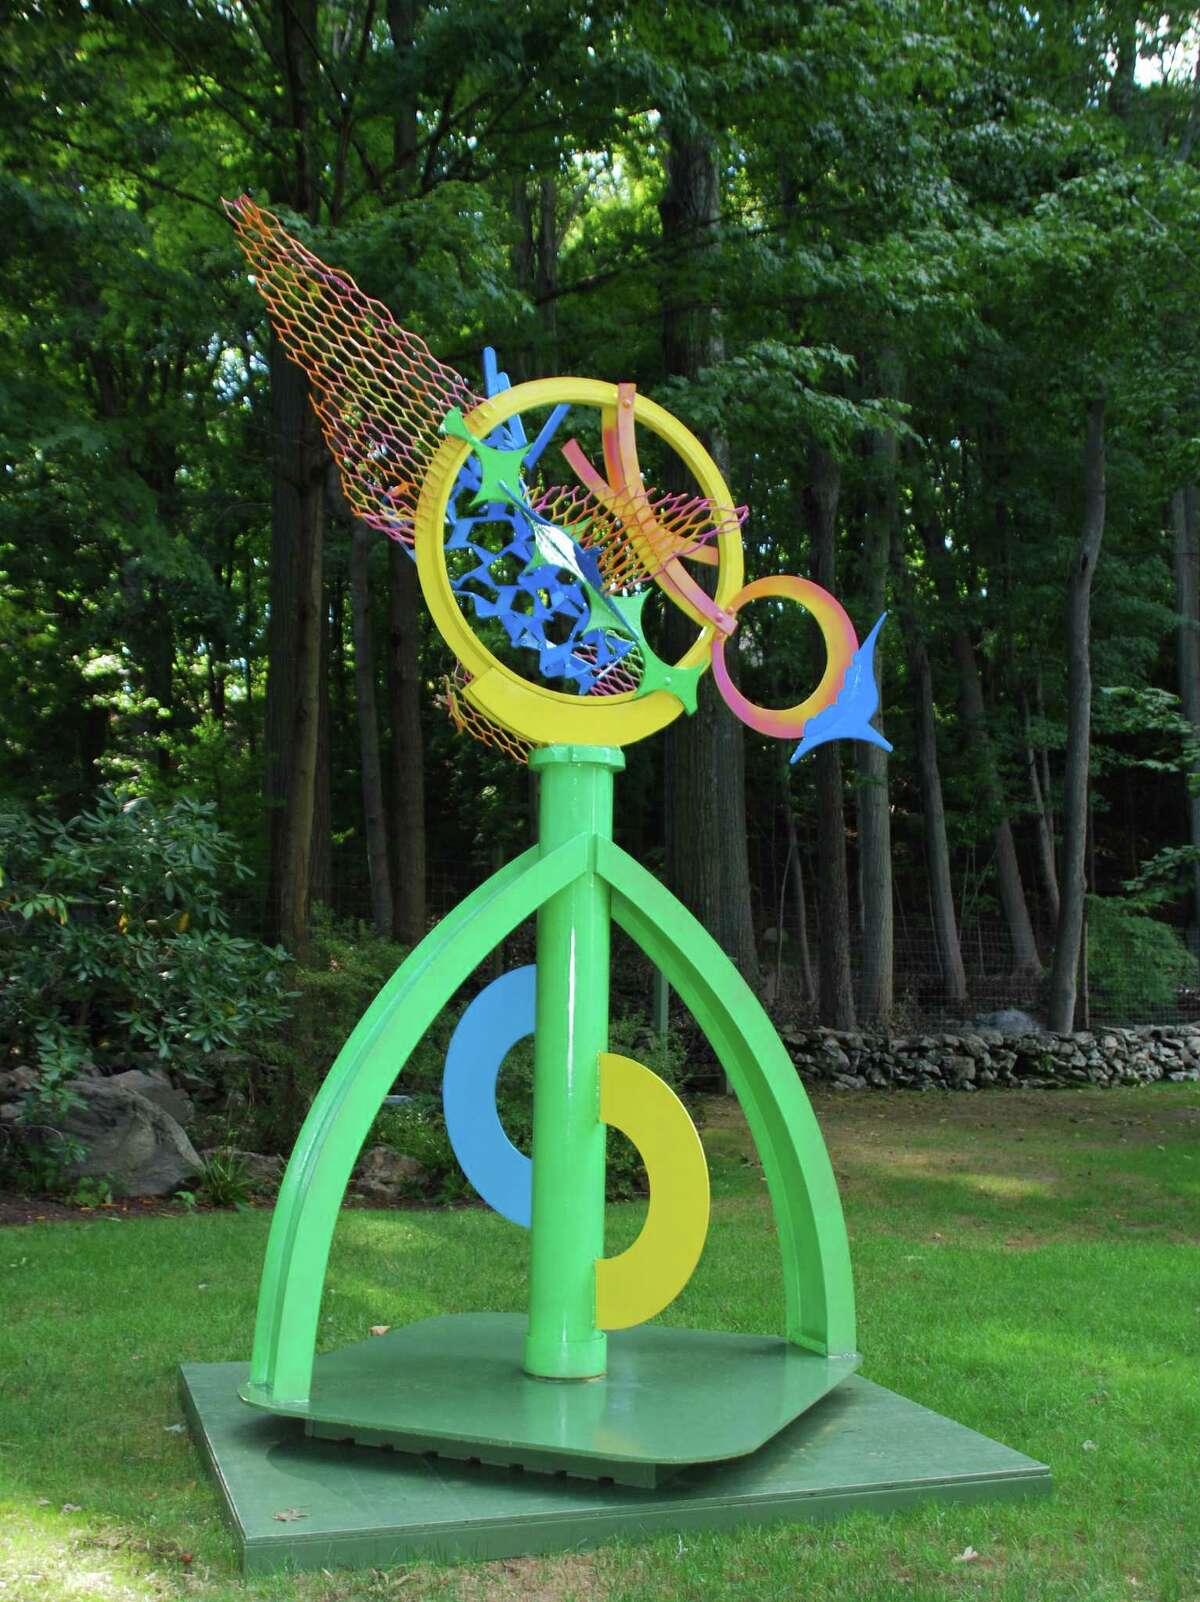 “Birdsong” is a large painted welded steel sculpture by Carole Eisner, on view through October on the Silvermine Sculpture Walk.